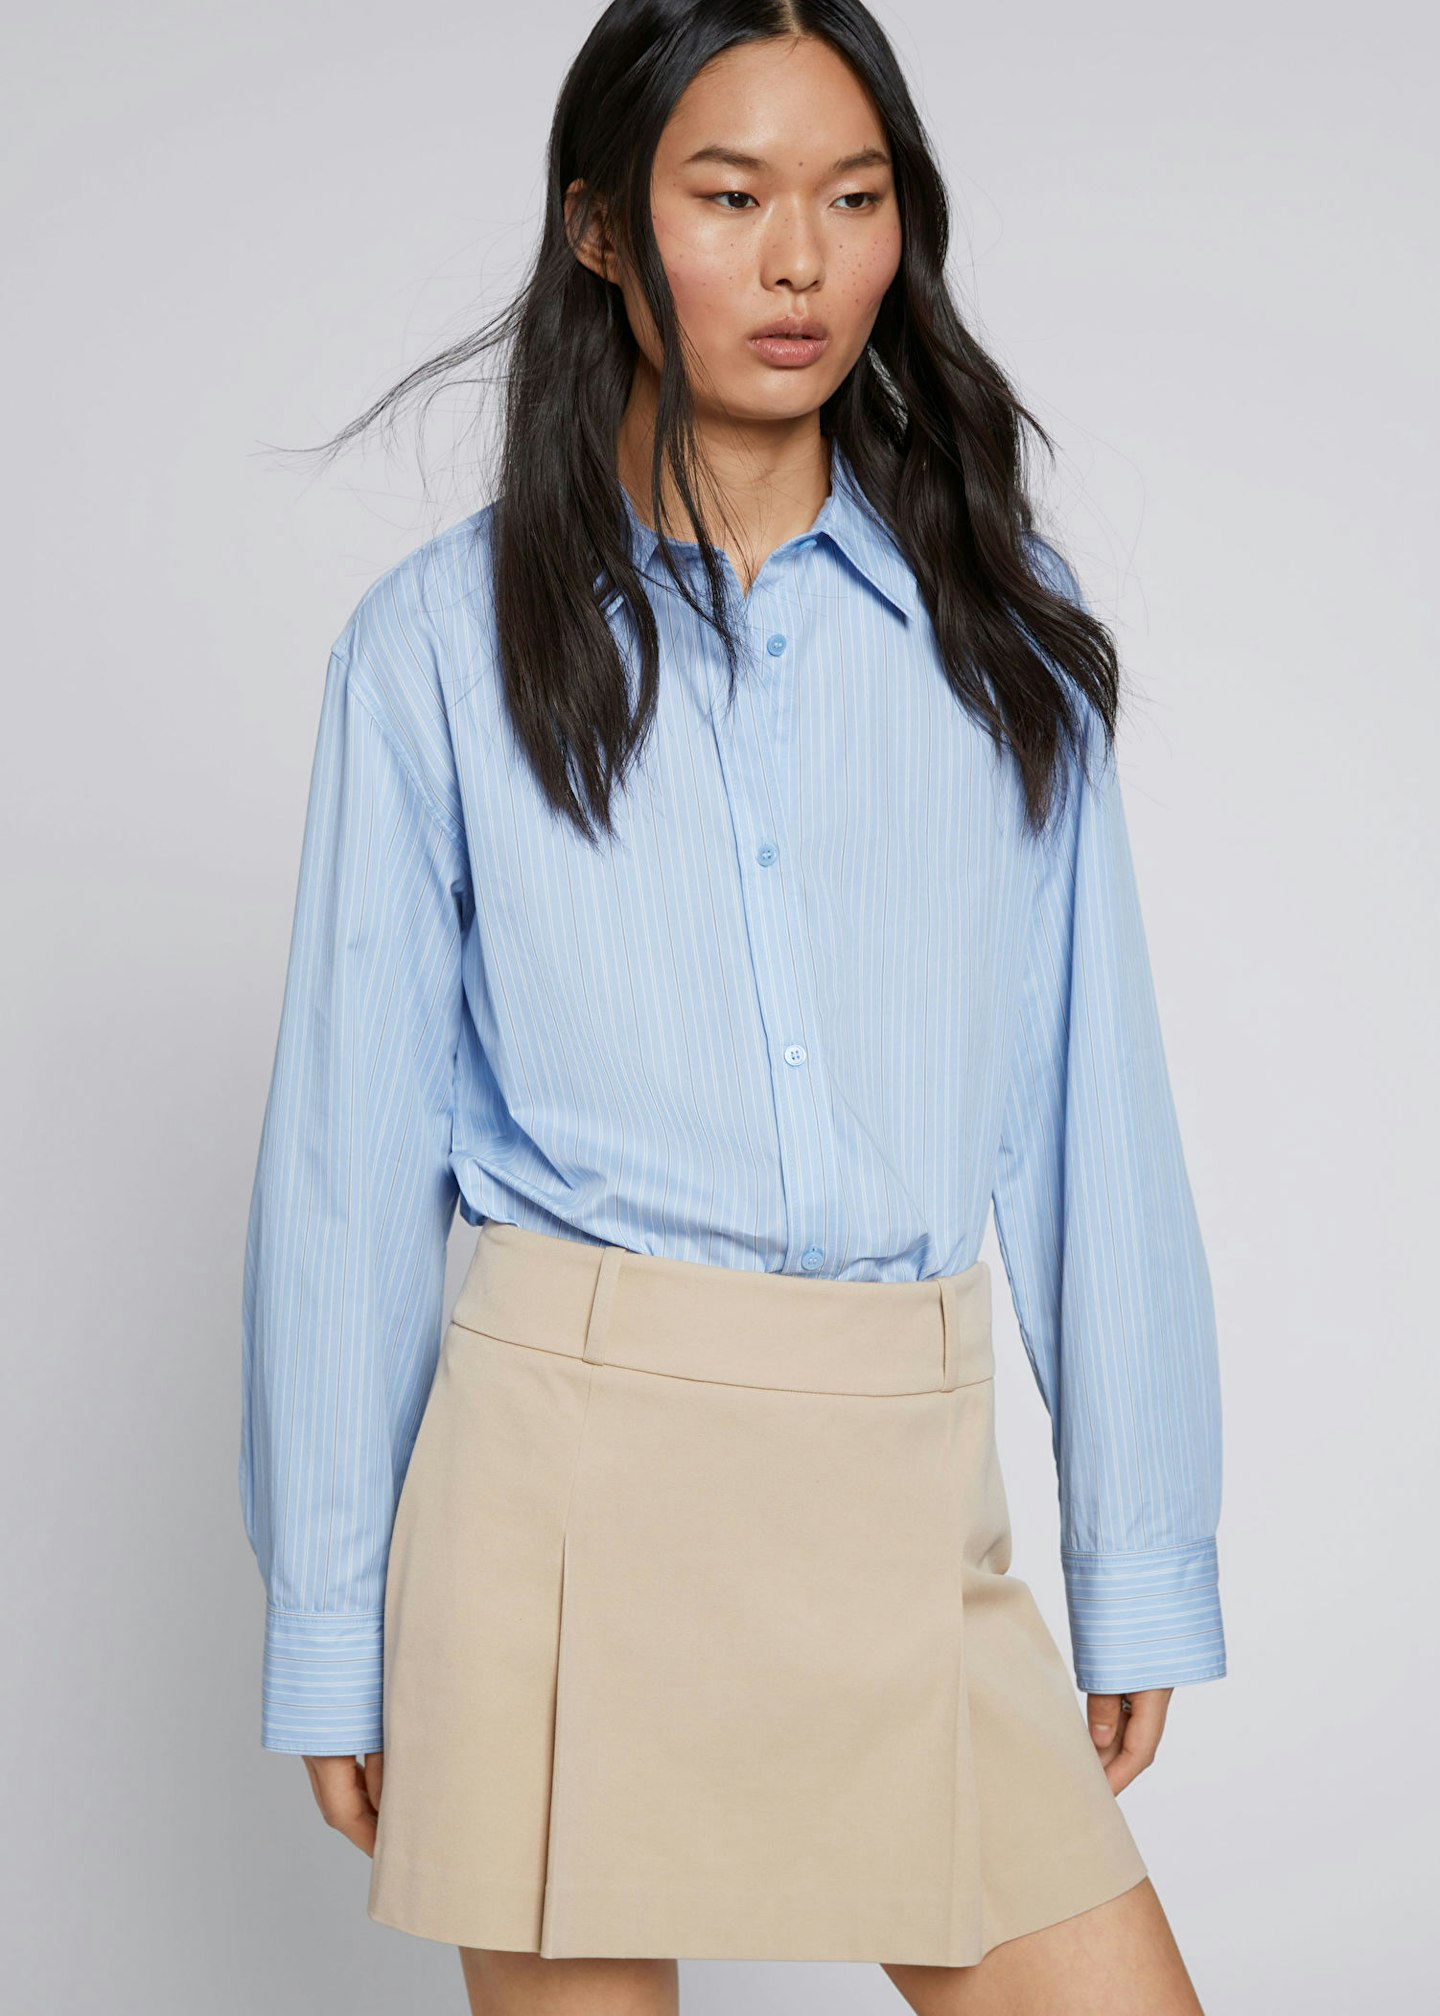 & Other Stories, Pleated A-Line Mini Skirt